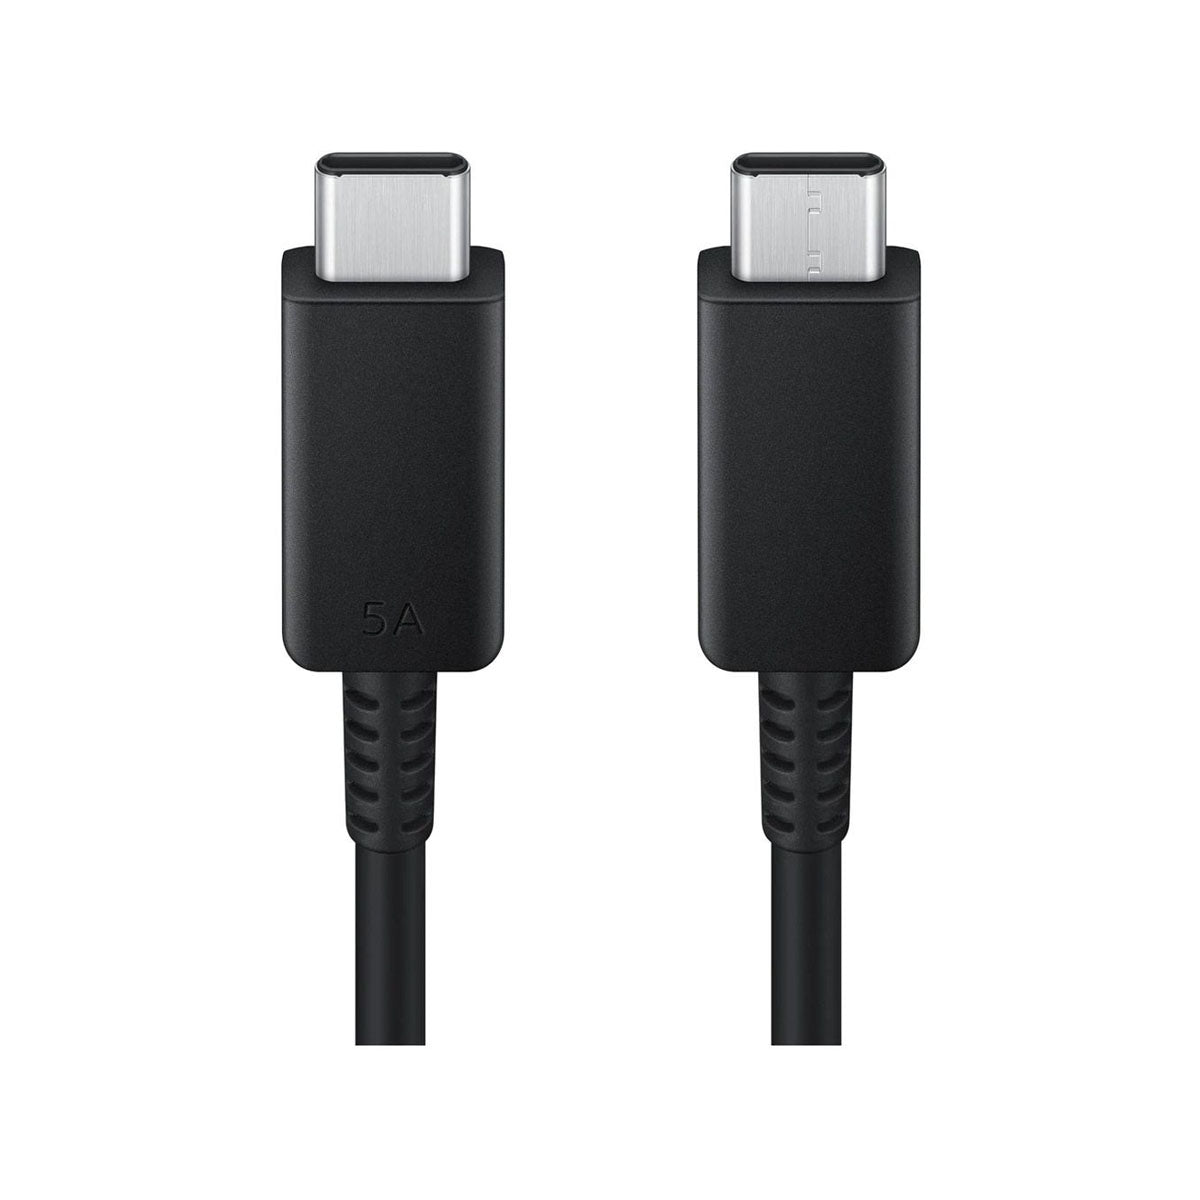 Samsung USB-C to USB-C Cable 5A 1.8M Support 45W for Mobiles